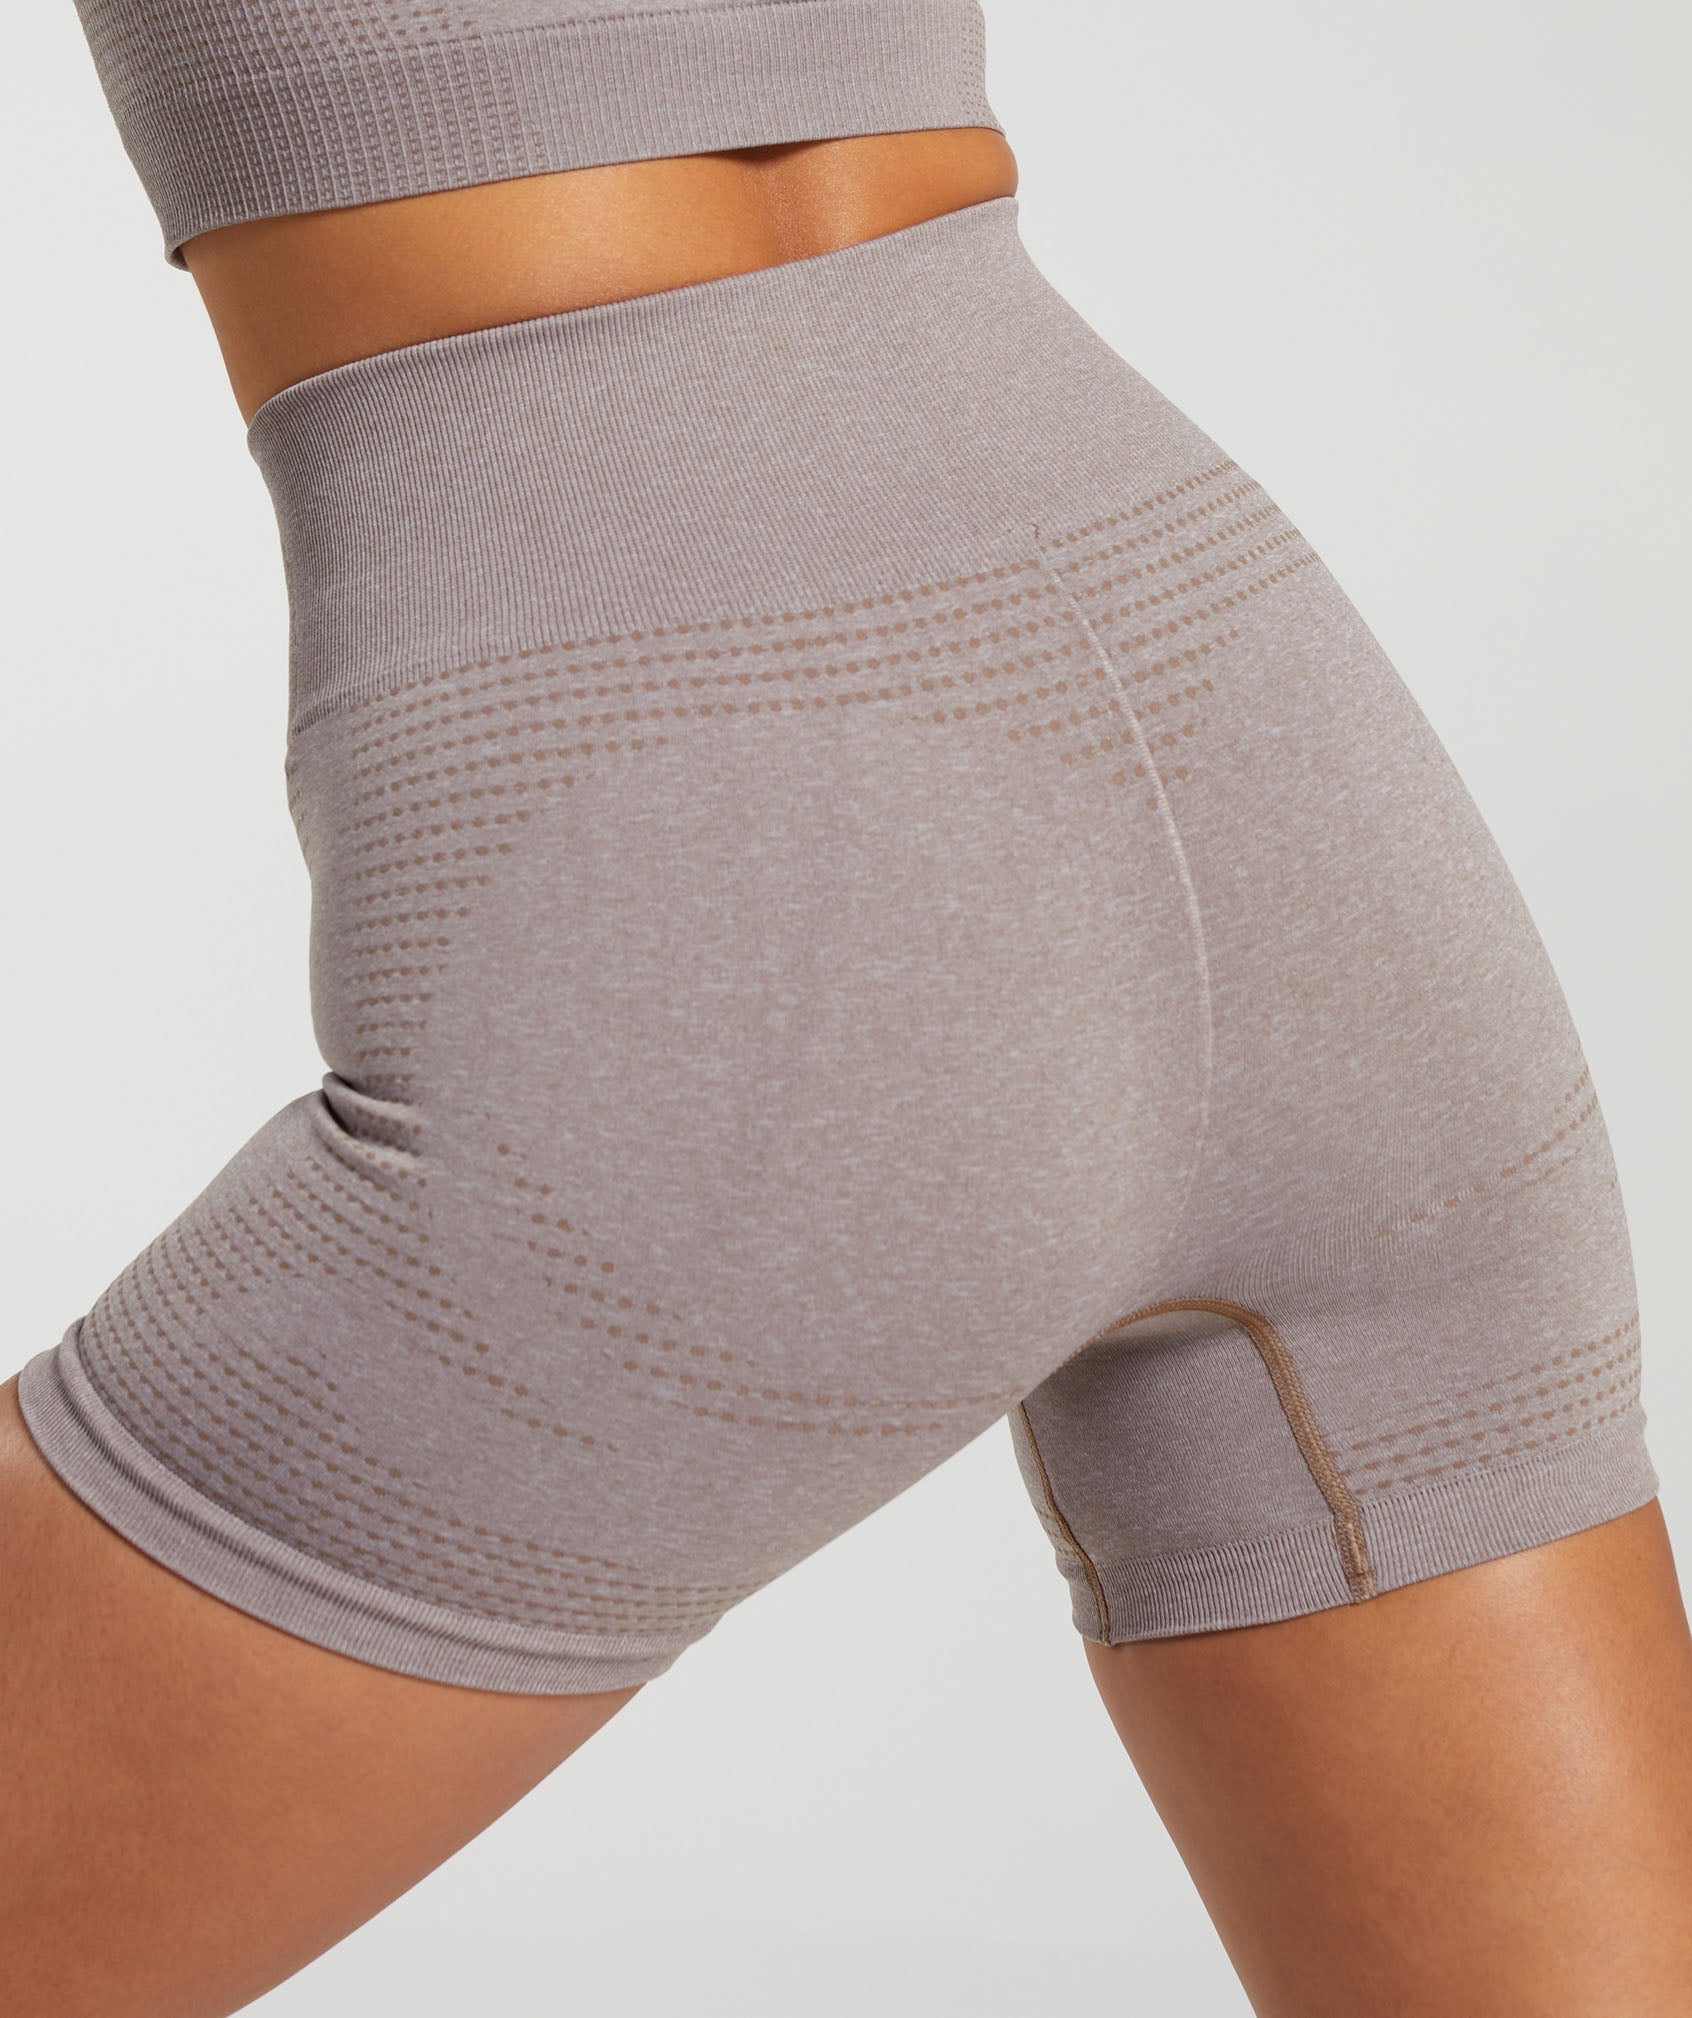 Vital Seamless 2.0 Shorts in Warm Taupe Marl - view 6